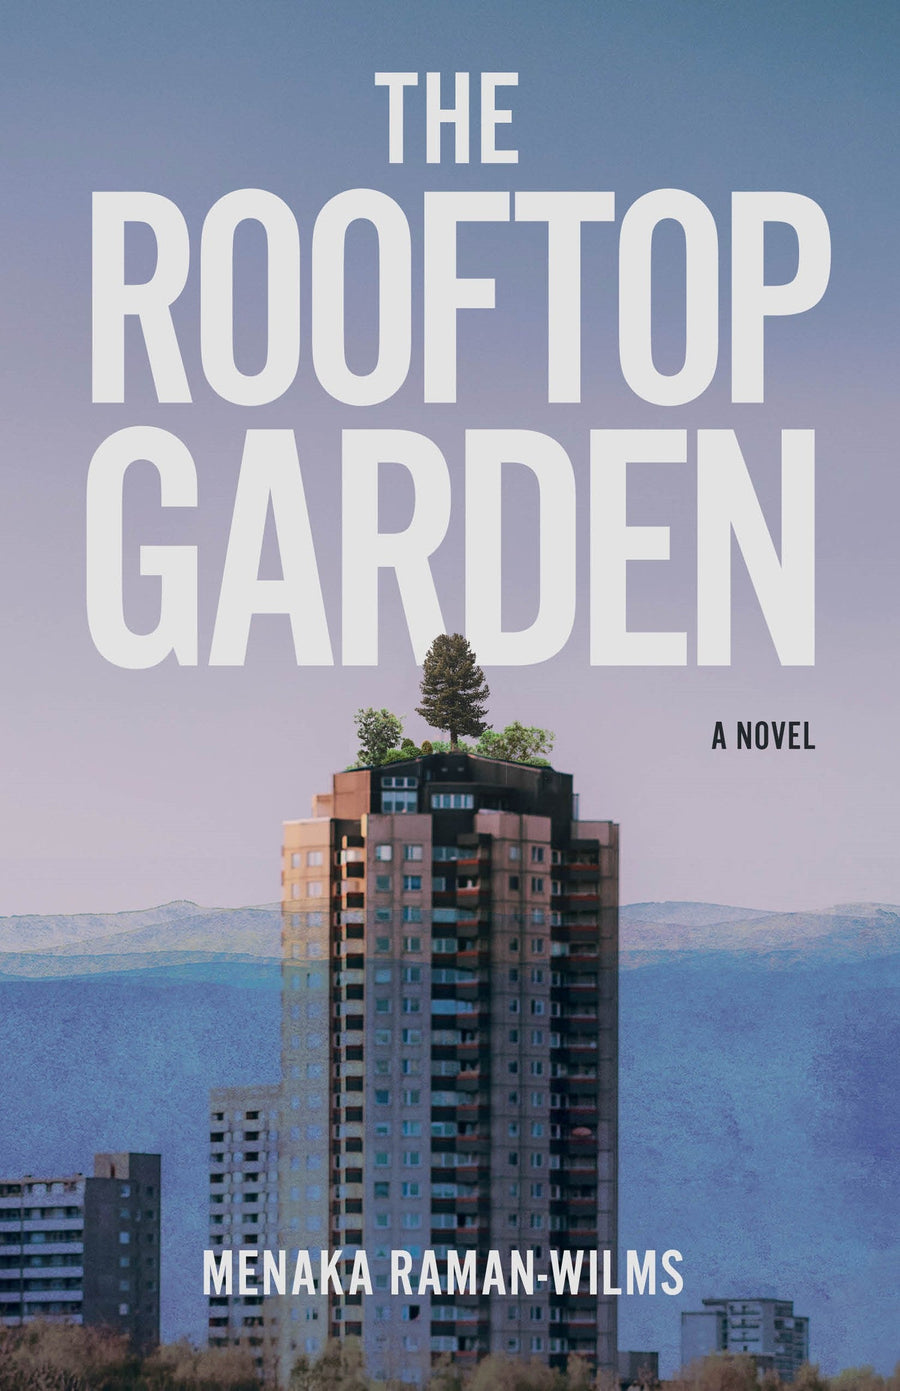 The Rooftop Garden - signed copy at in-person event